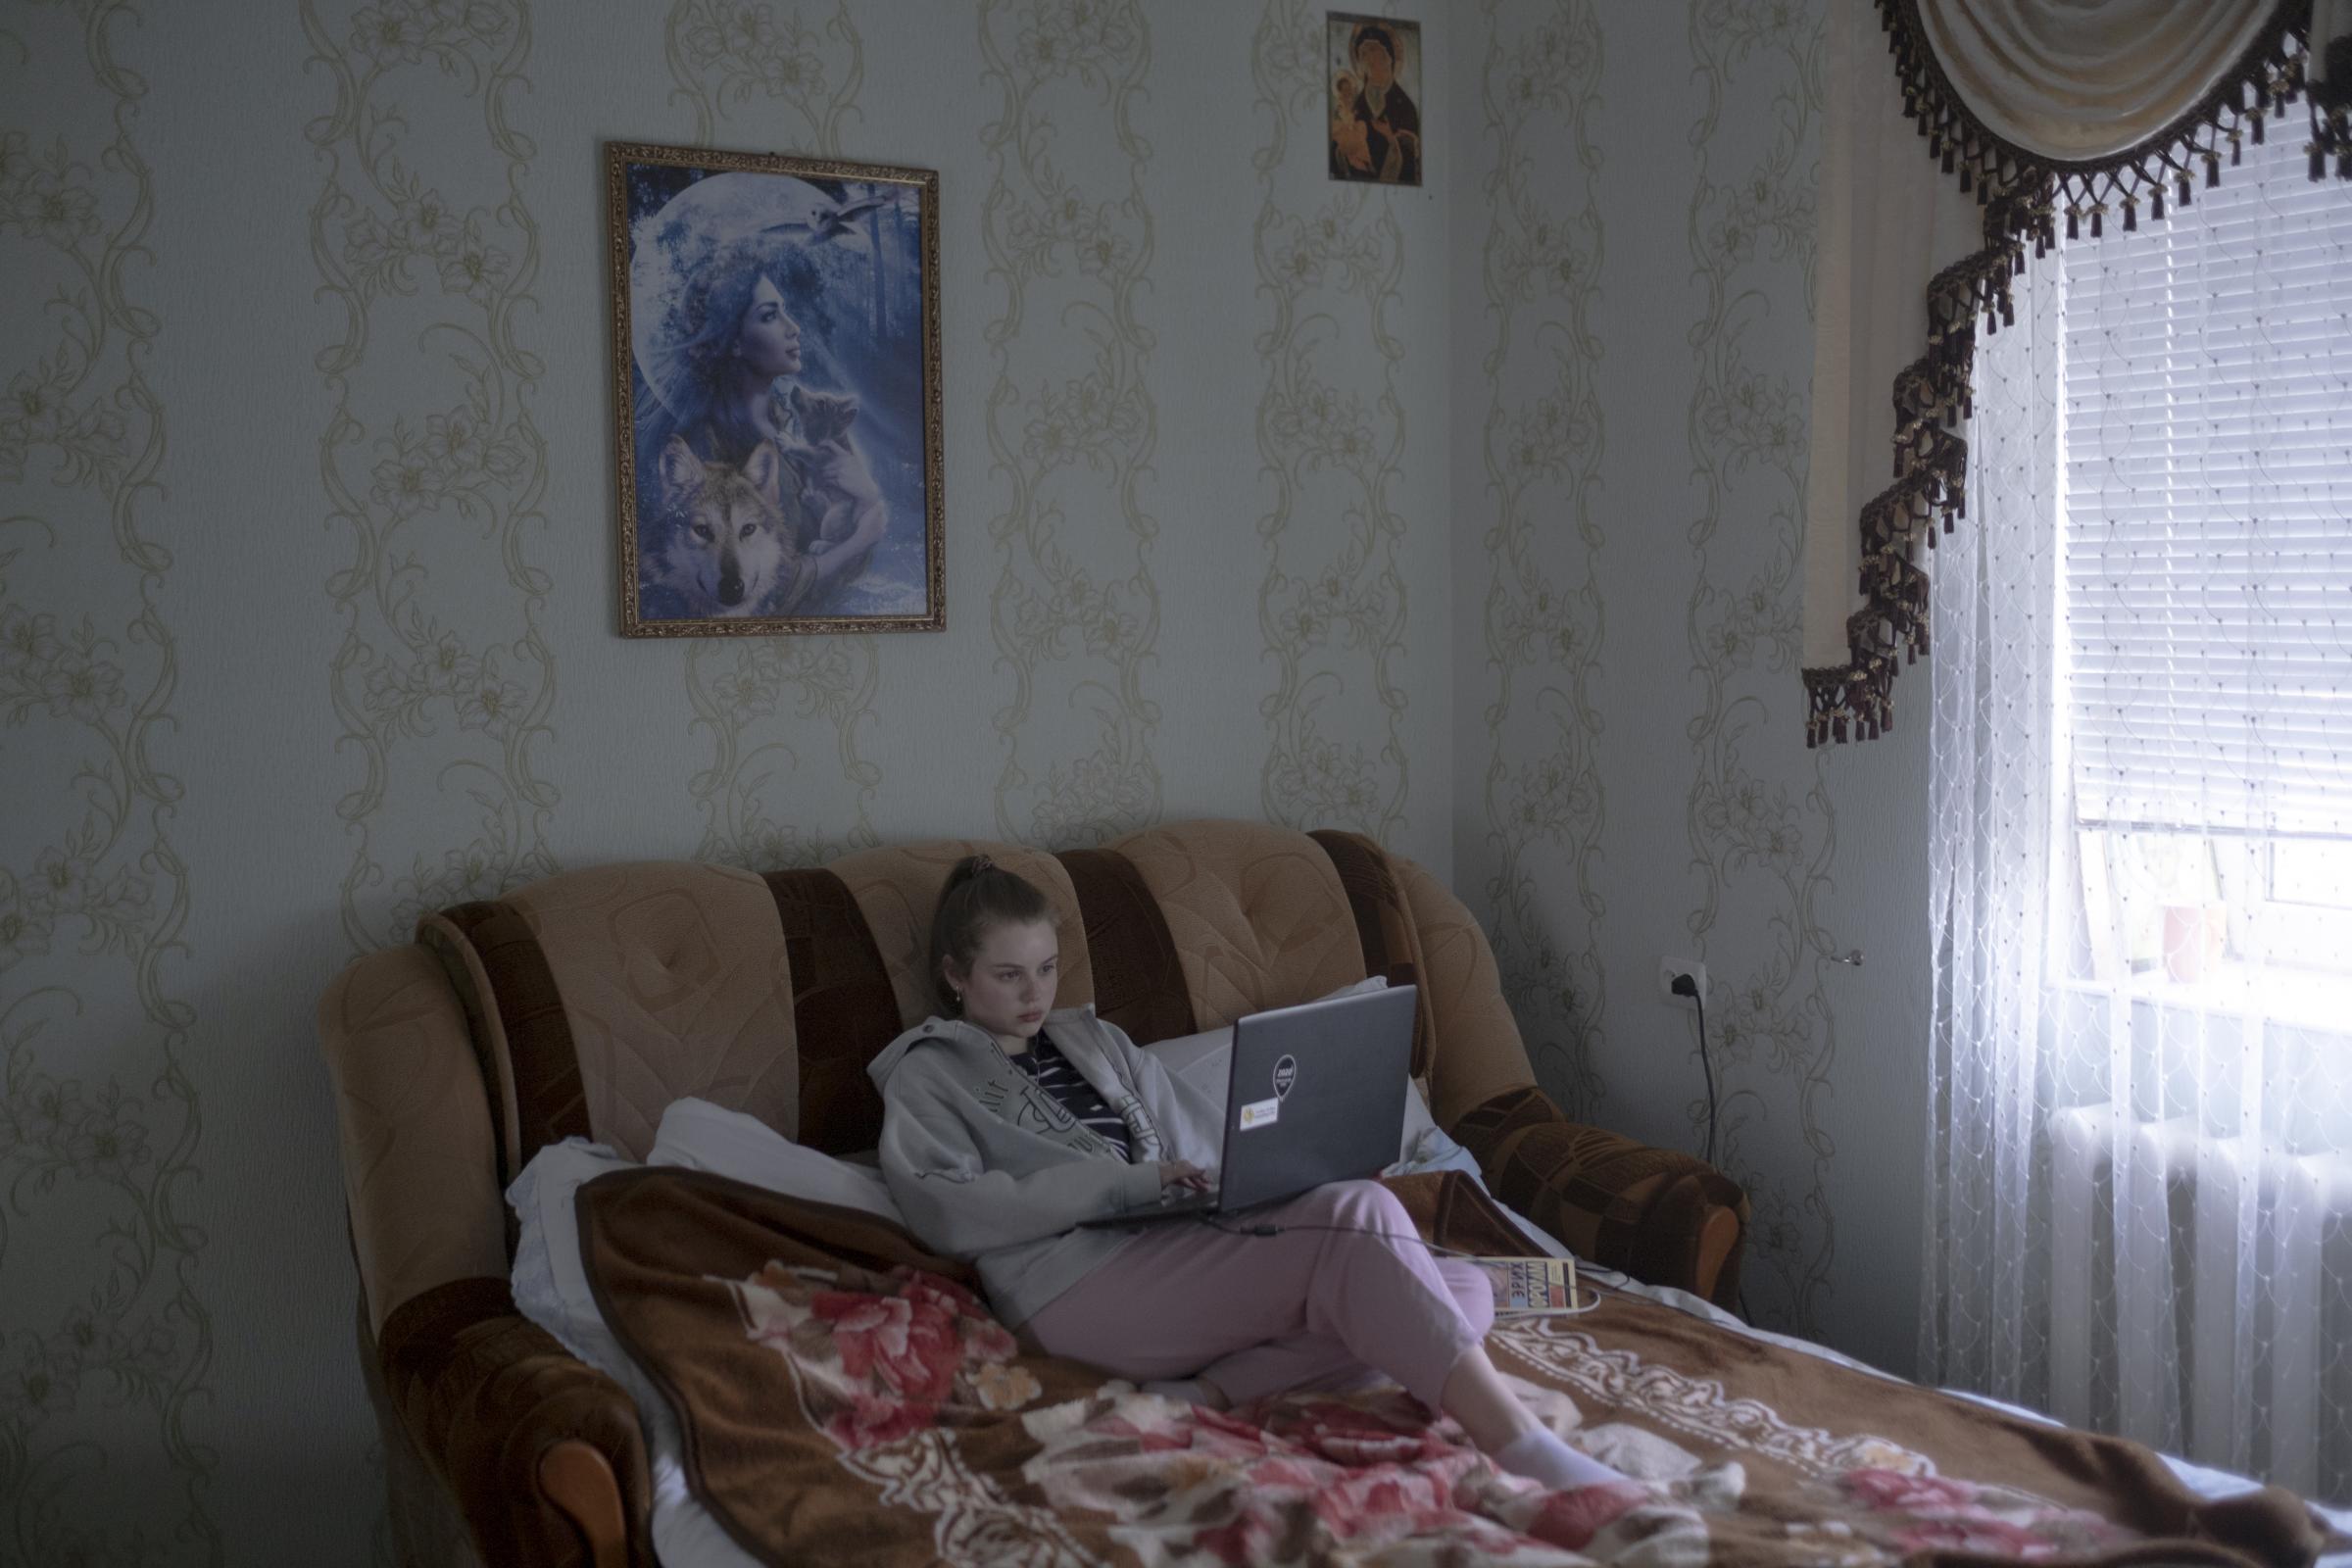 Moldovans who sheltered Ukrainian refugees at home - Karina is trying to study online.